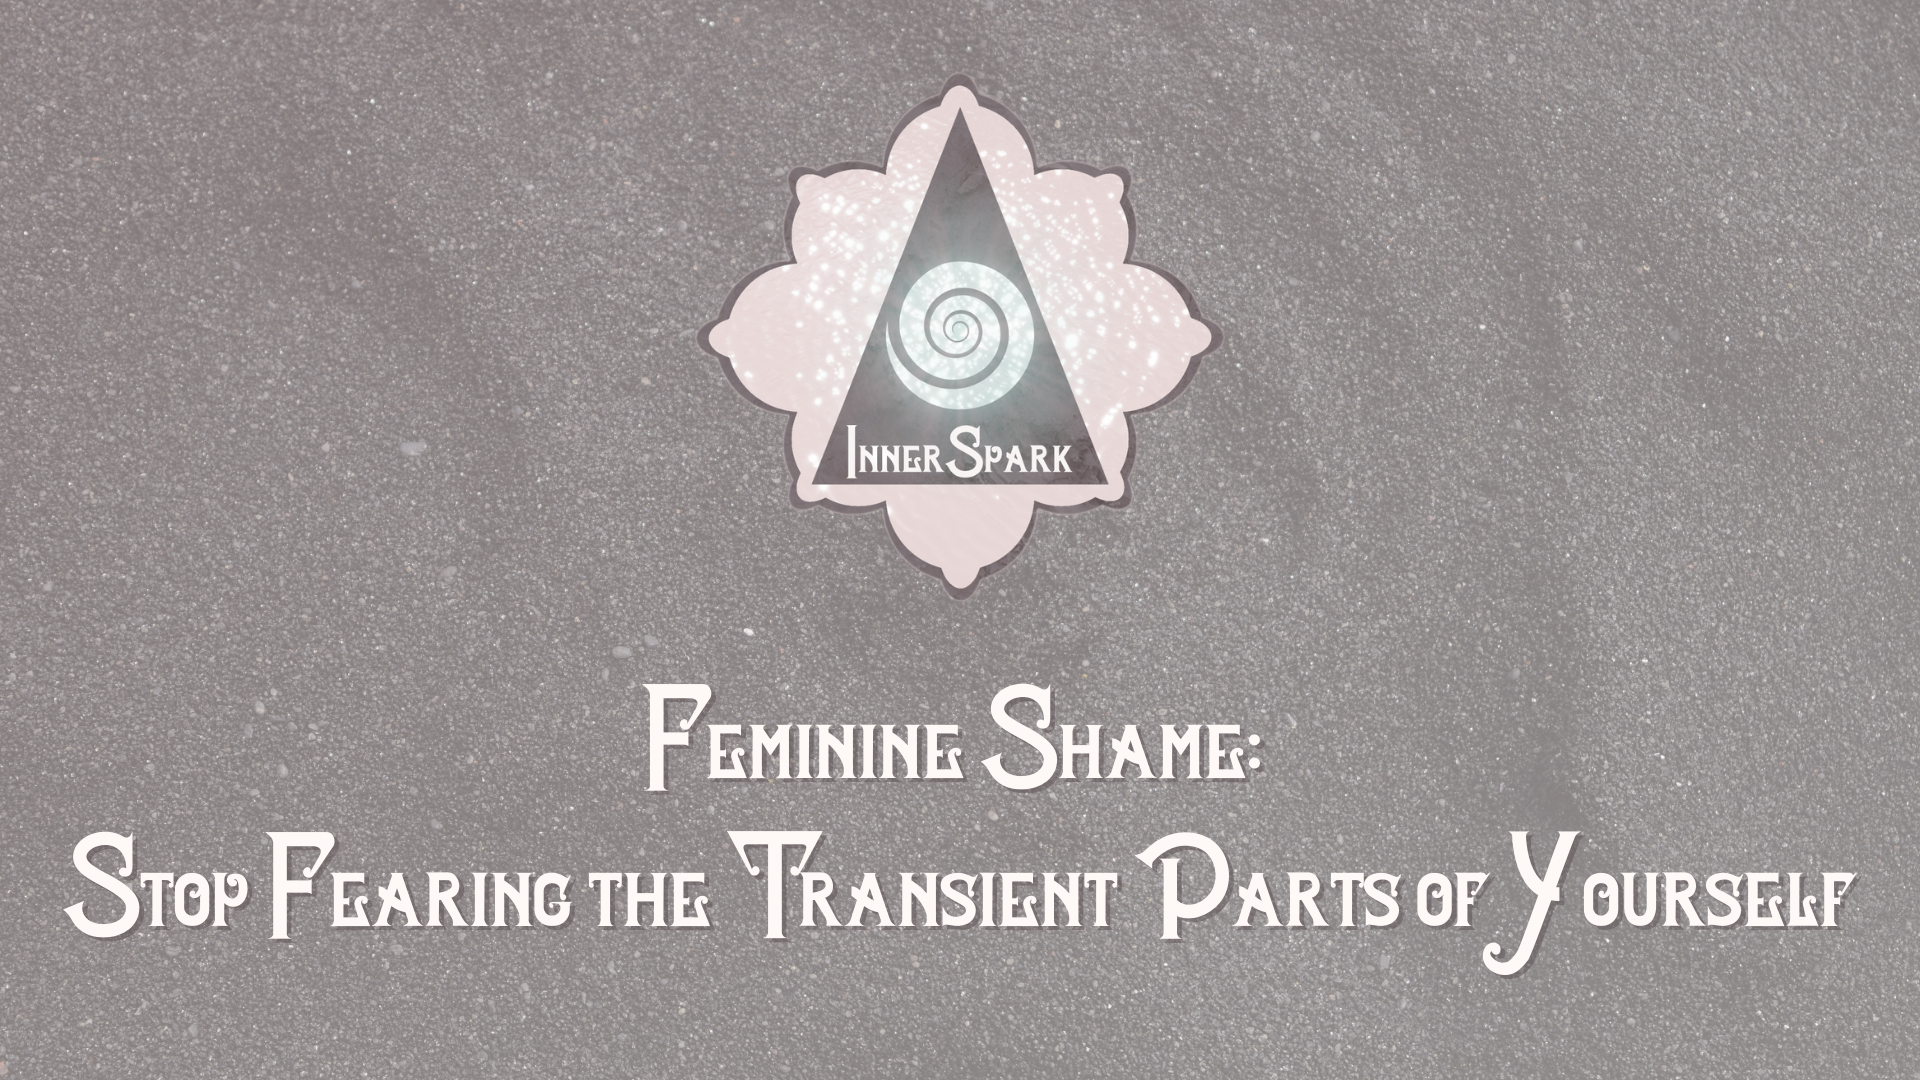 Feminine Shame: Stop Fearing the Transient Parts of Yourself